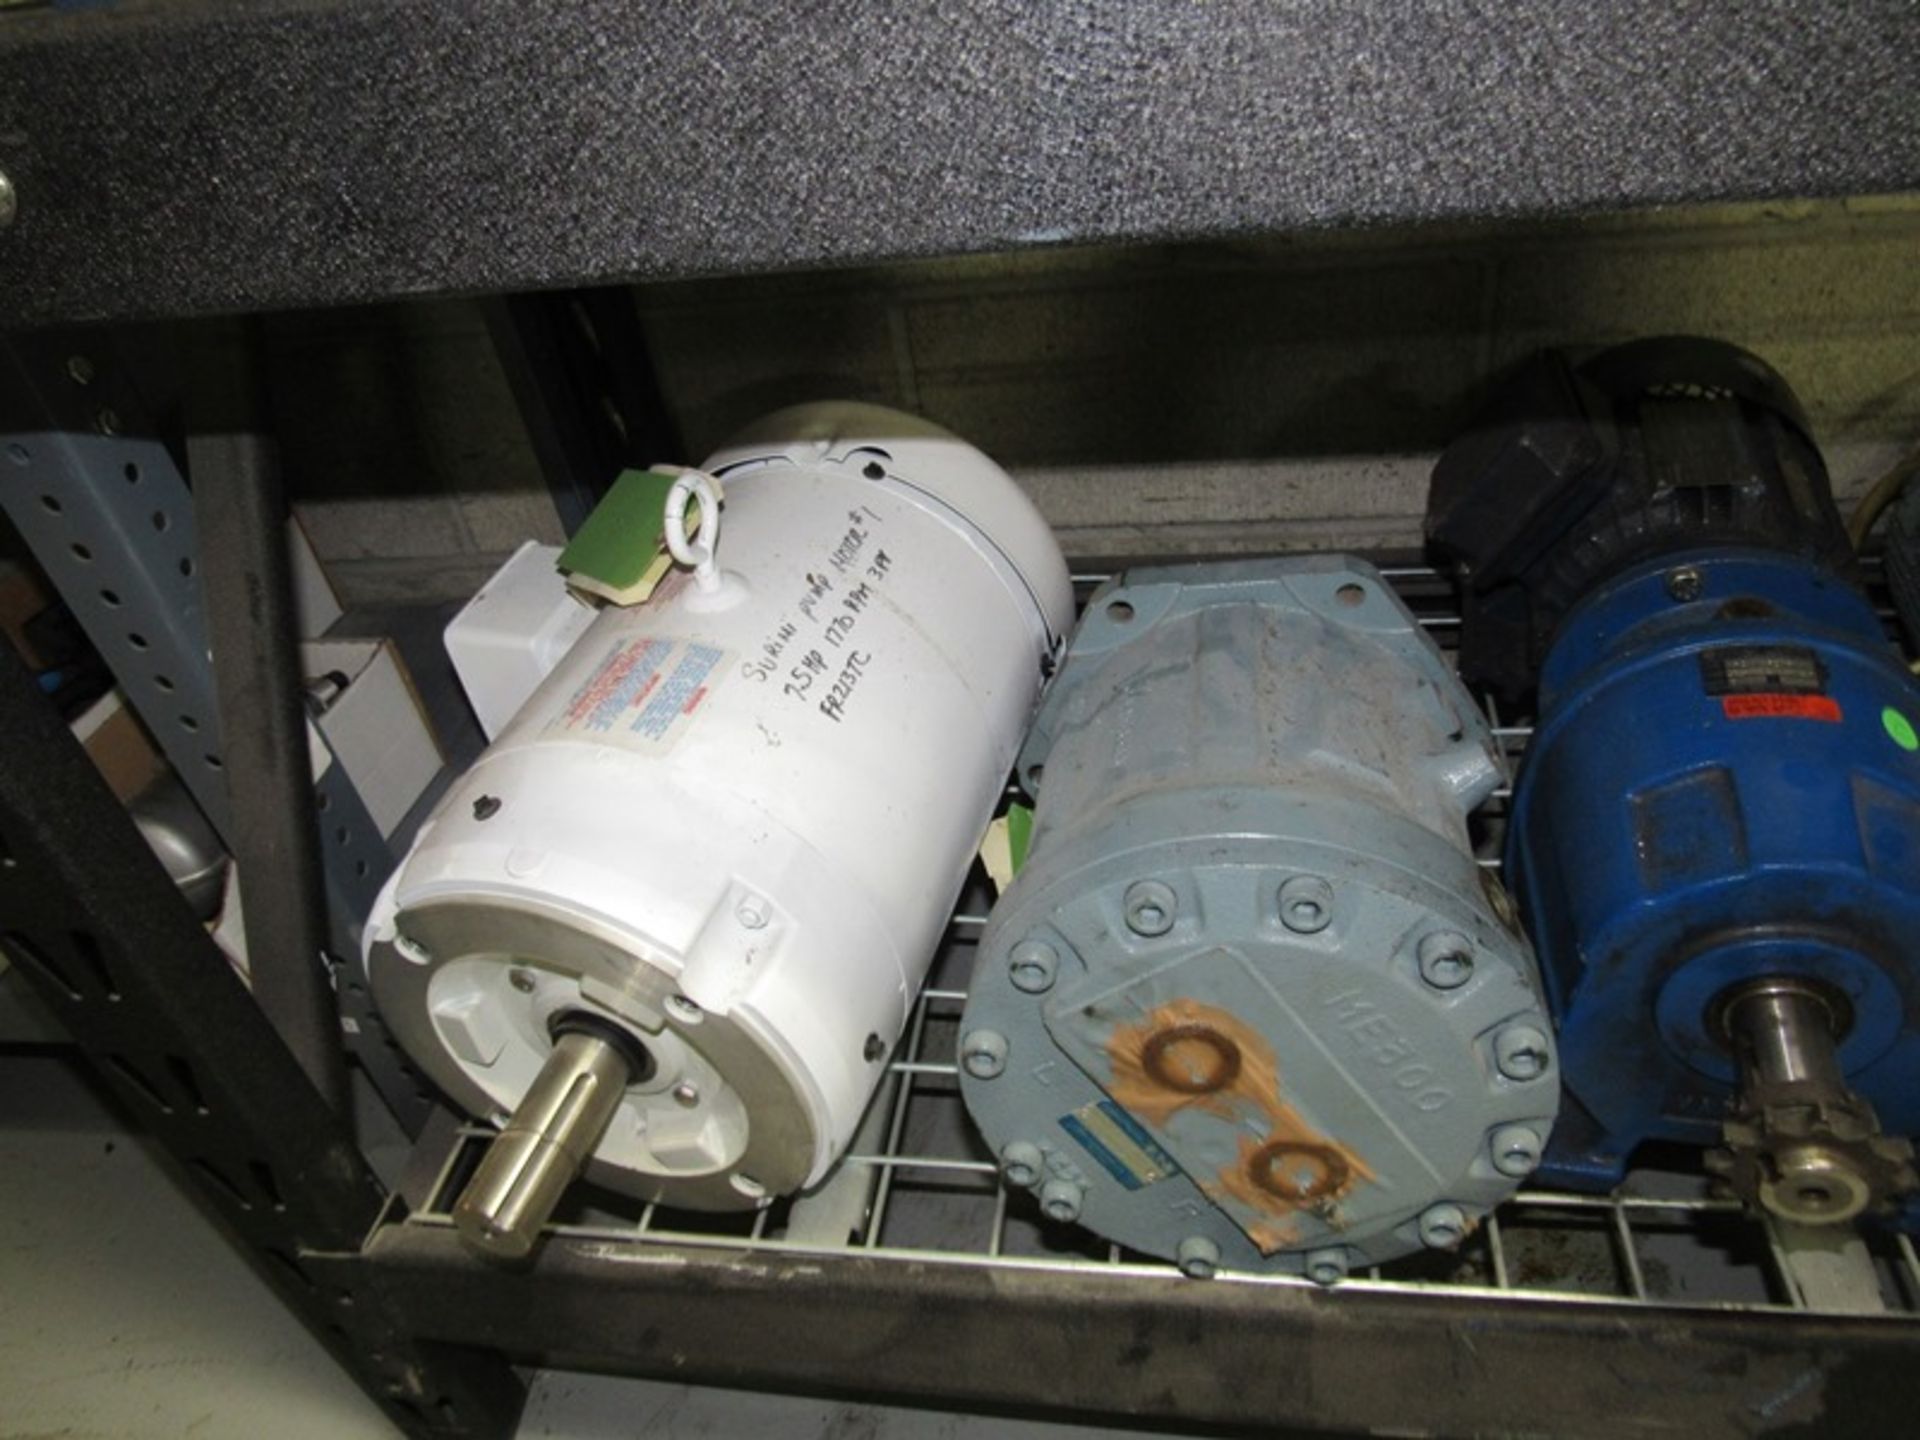 Lot (6) Misc. Electric Motors and Gearbox (Required Loading Fee $20.00 Norm Pavlish 402-540-8843 - Image 4 of 4